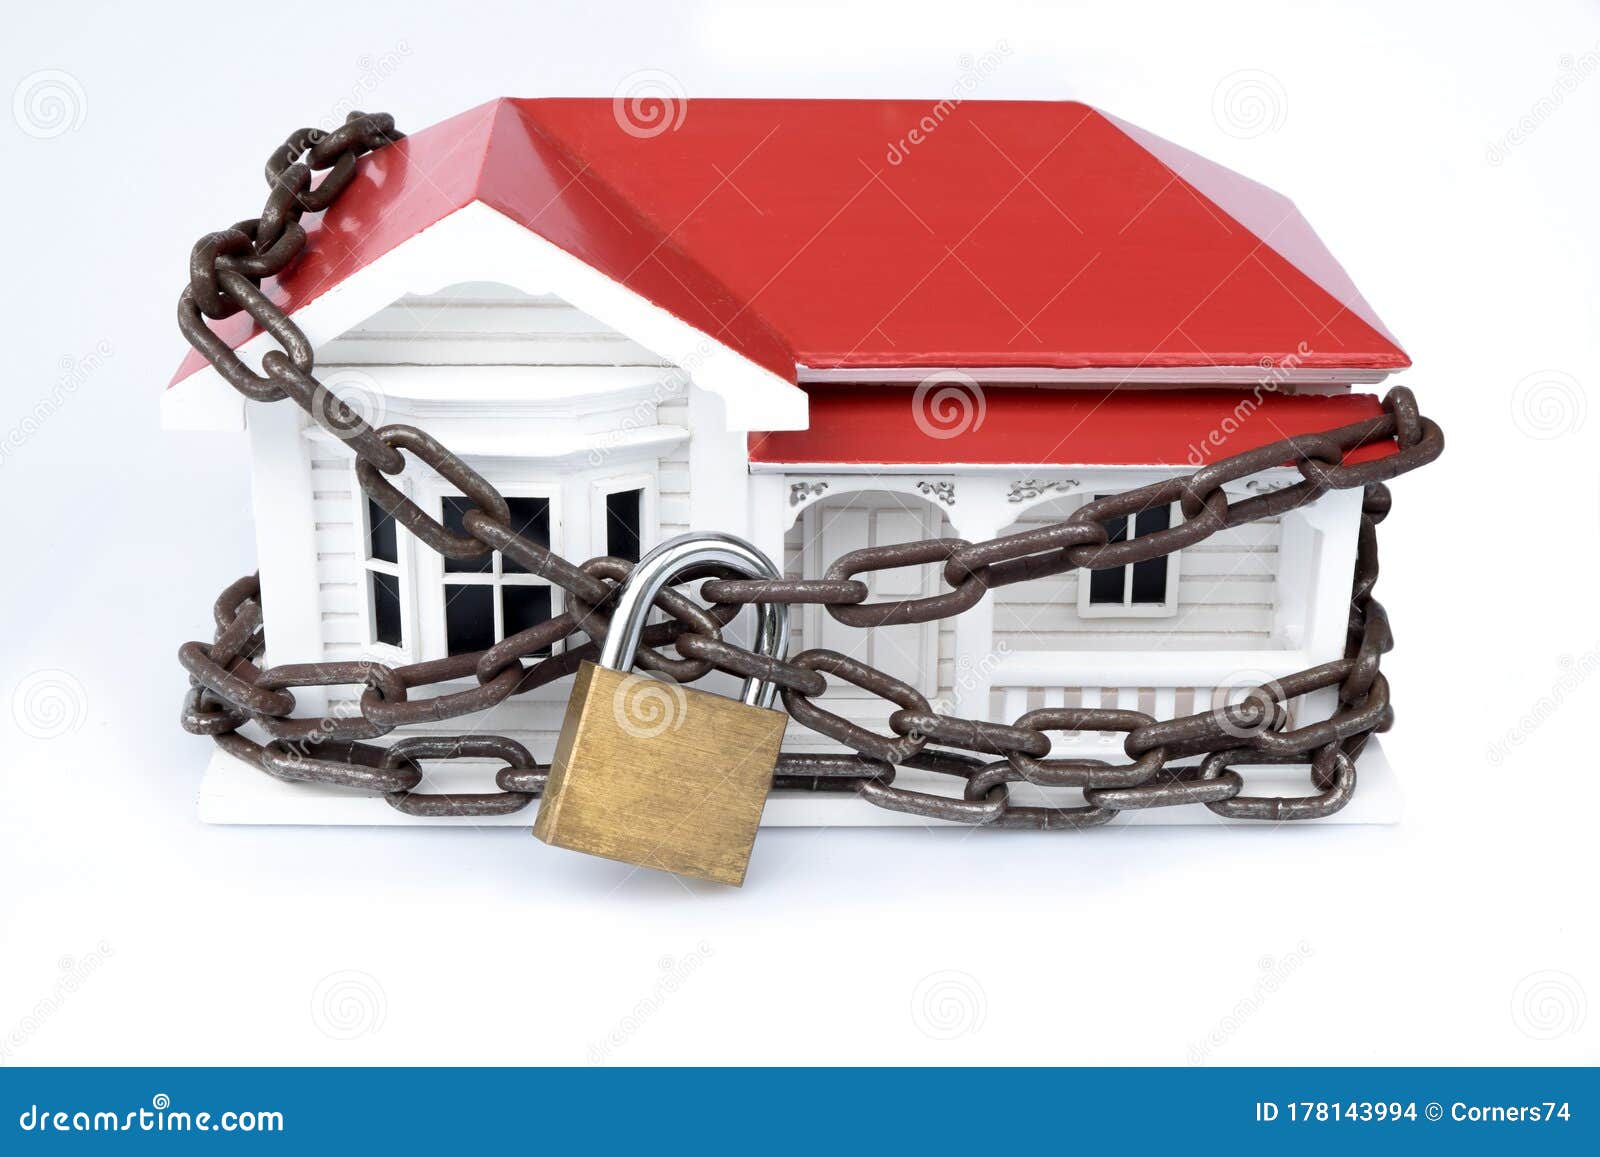 house arrest: locked down or quarantined concept of model home with chain and lock